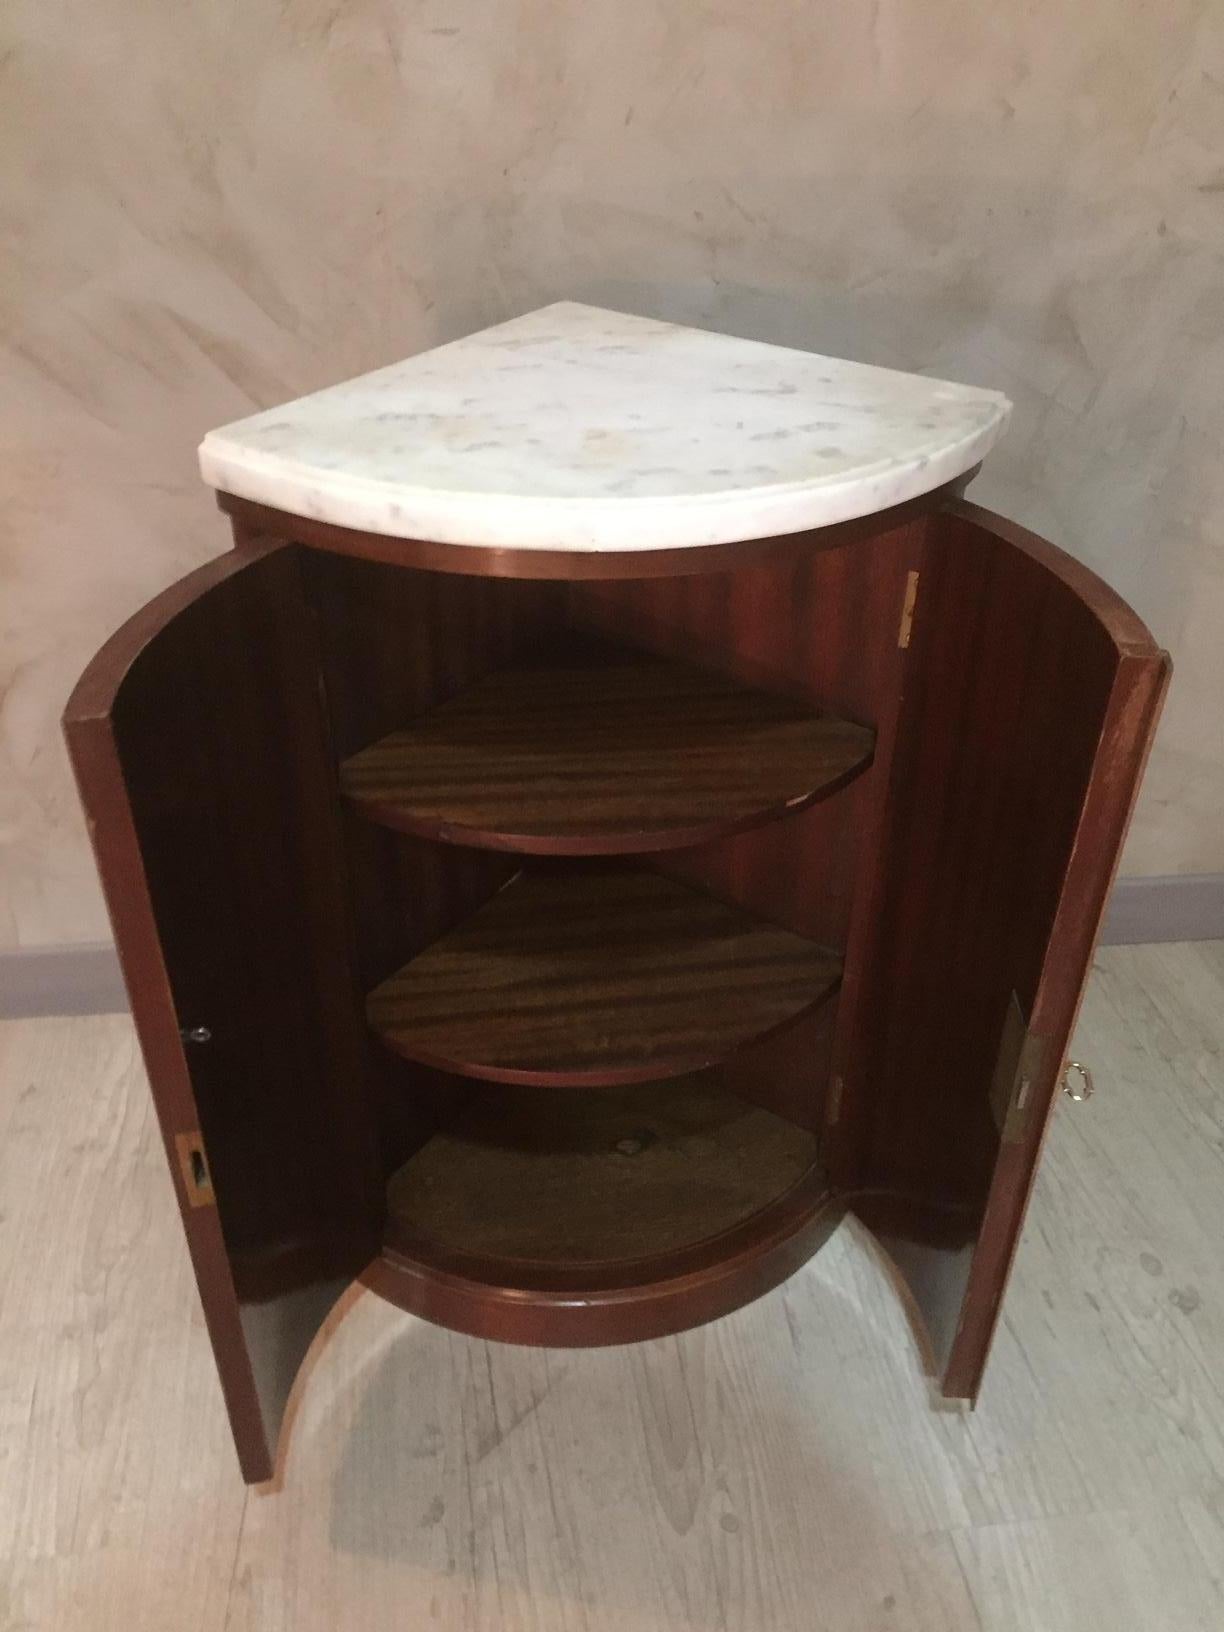 20th Century, French Mahogany Corner Cupboard with Marble Top, 1930s (Mitte des 20. Jahrhunderts)